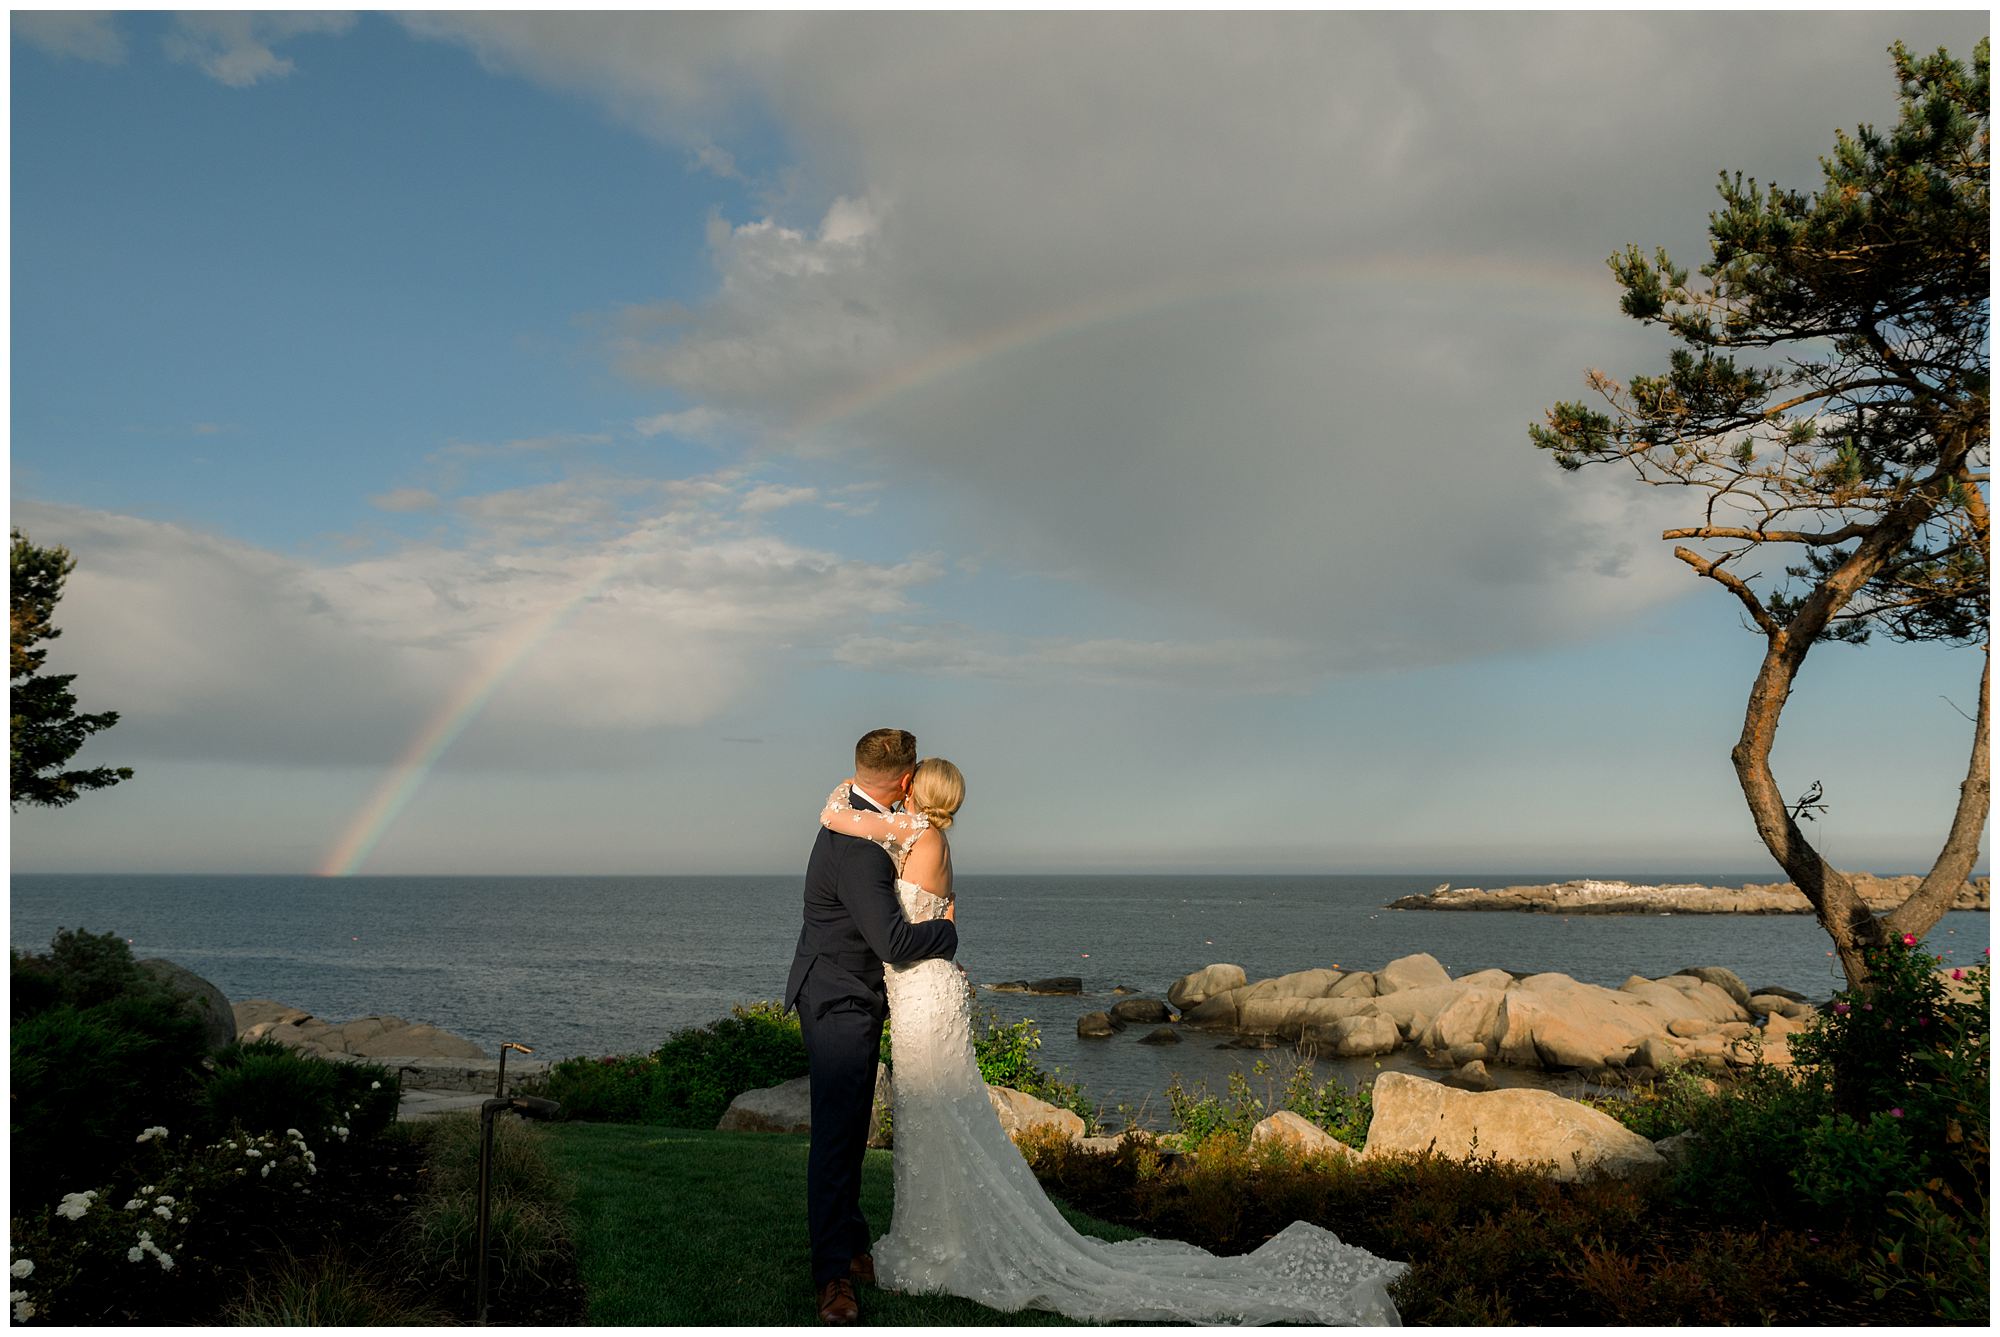 Rainbow appears during wedding at Viewpoint Hotel in York Maine